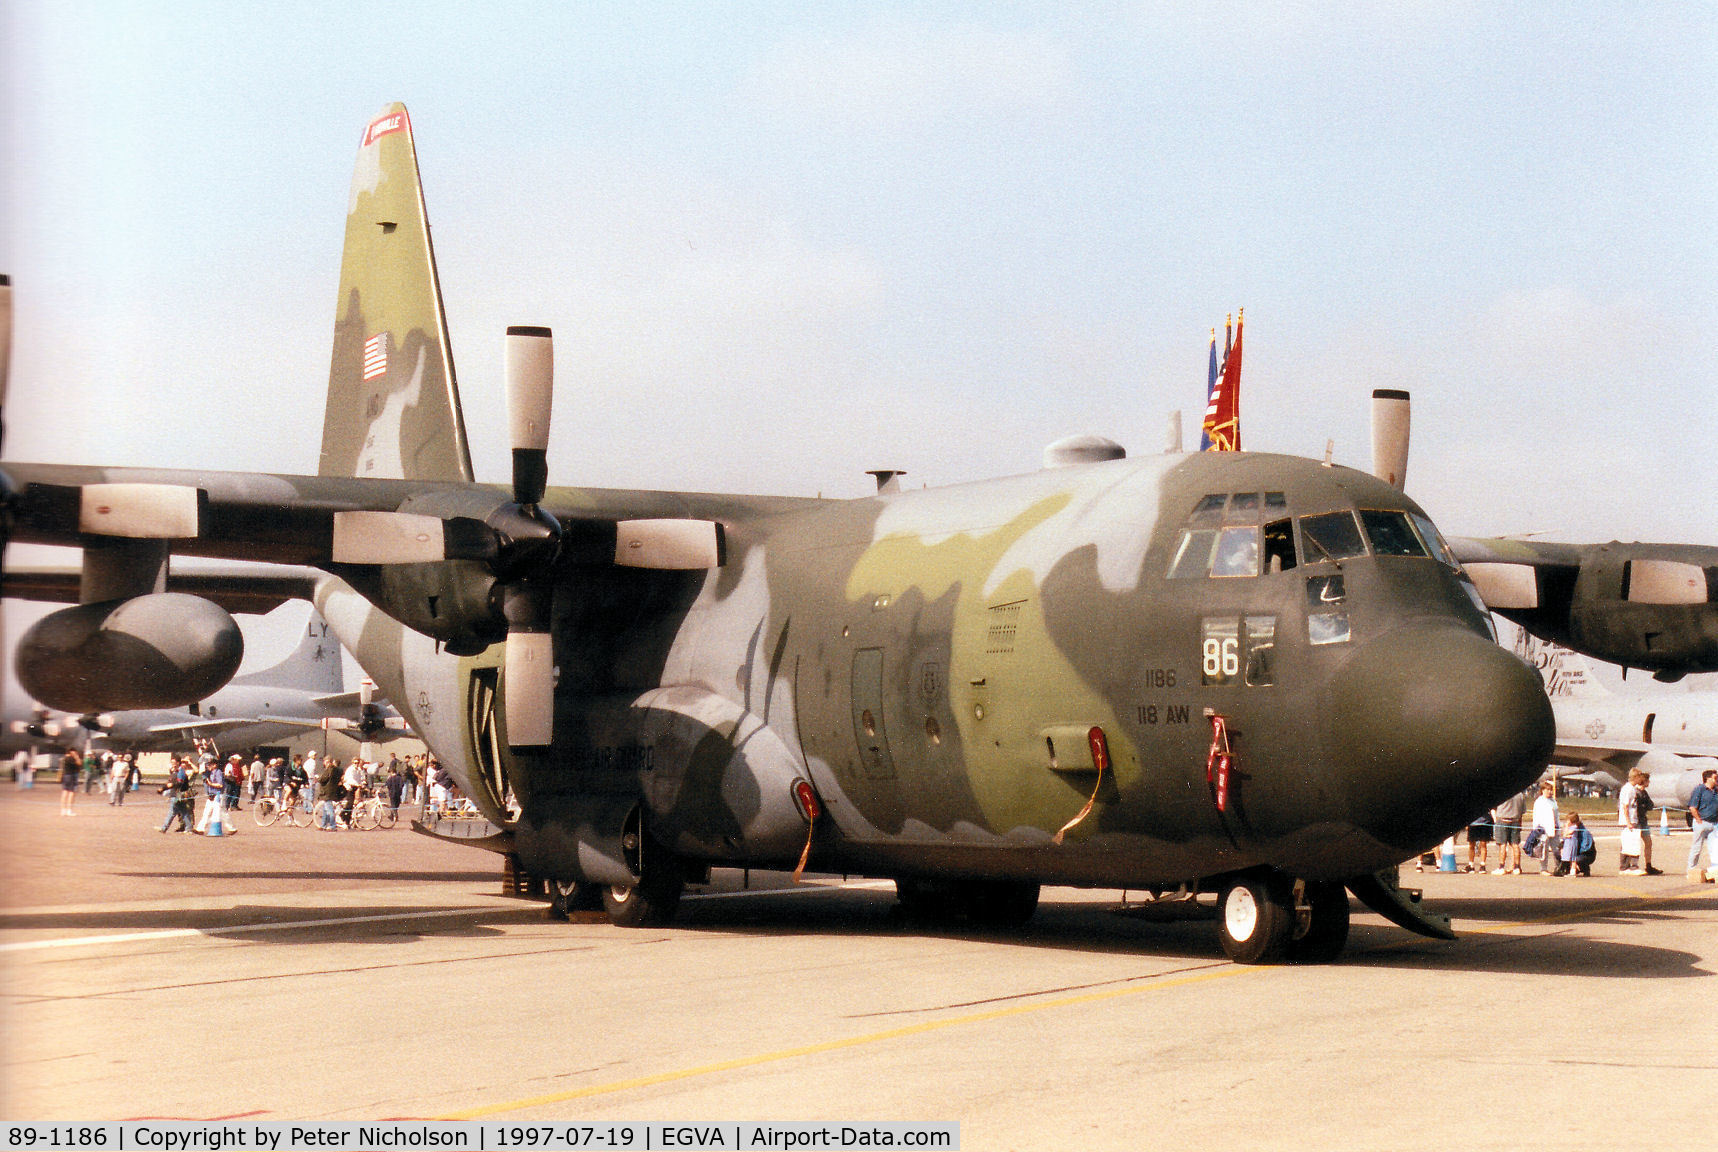 89-1186, 1989 Lockheed C-130H Hercules C/N 382-5195, C-130H Hercules, callsign Music 86, of 105th Airlift Squadron Tennessee Air National Guard on display at the 1997 Intnl Air Tattoo at RAF Fairford.